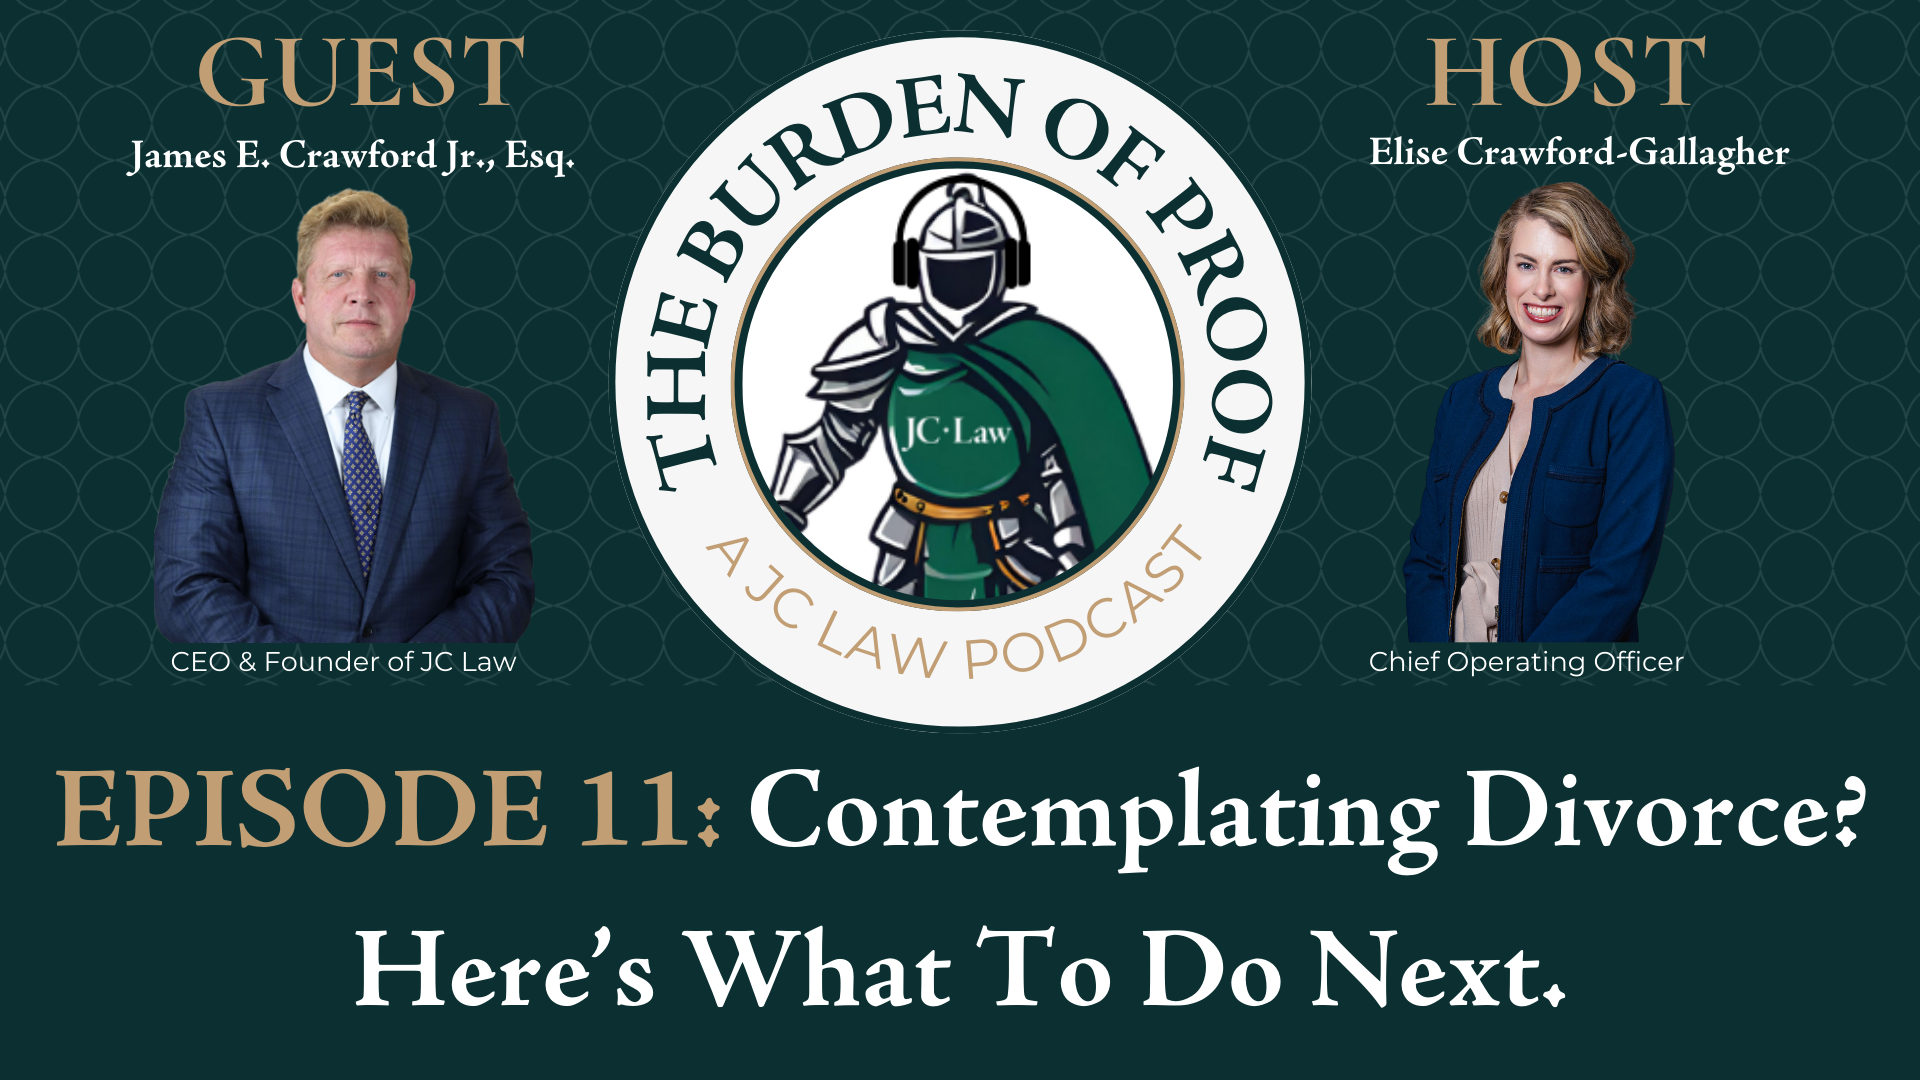 Episode 11: Contemplating Divorce? Here's What To Do Next.